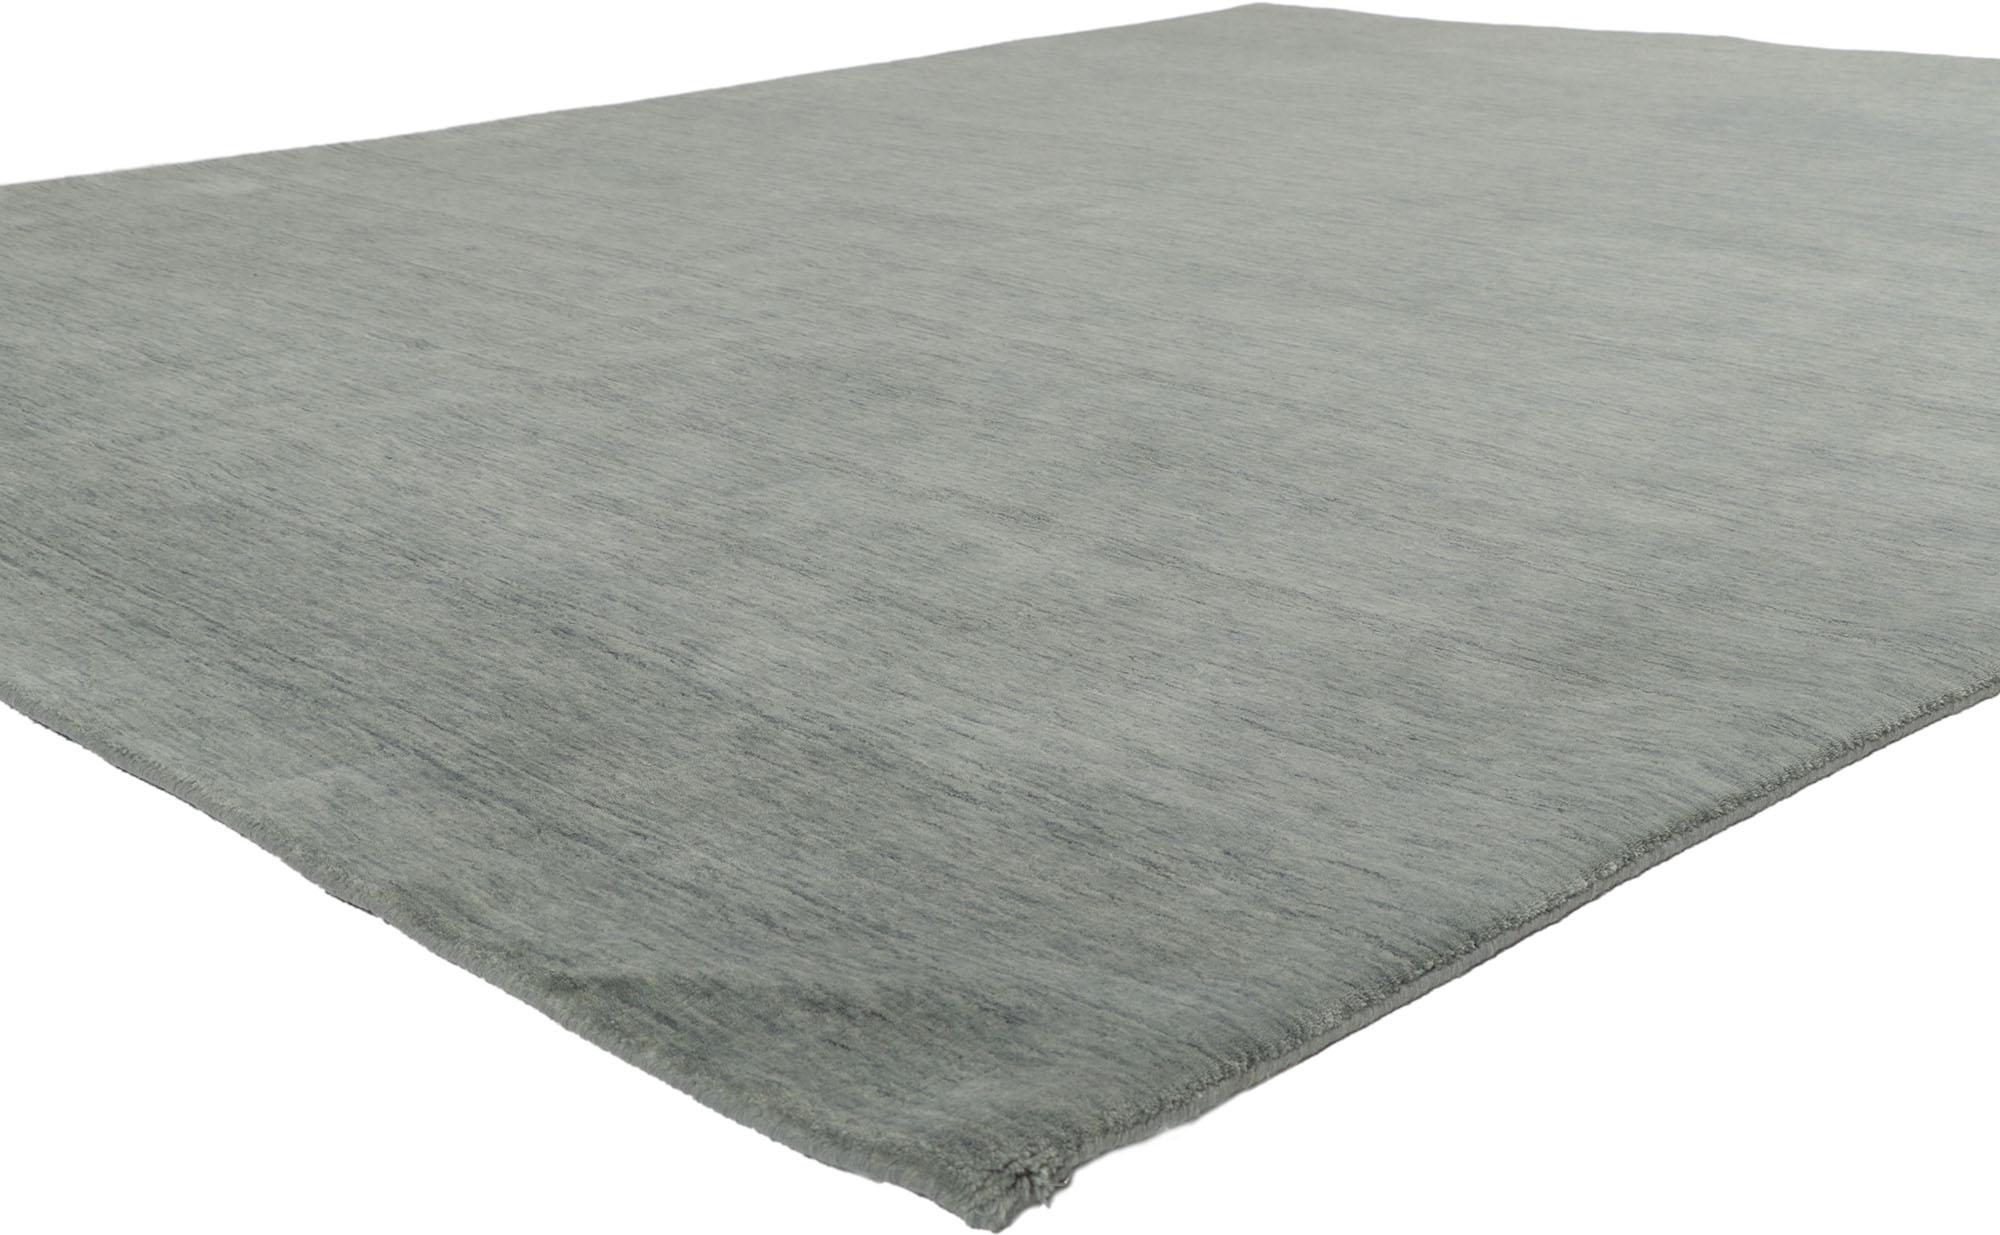 30739 New Contemporary Gray Area Rug with Modern Style 08'01 x 09'11. Effortless beauty combined with simplicity and modern style, this hand-loom wool contemporary Indian rug provides a feeling of cozy contentment without the clutter. Imbued with